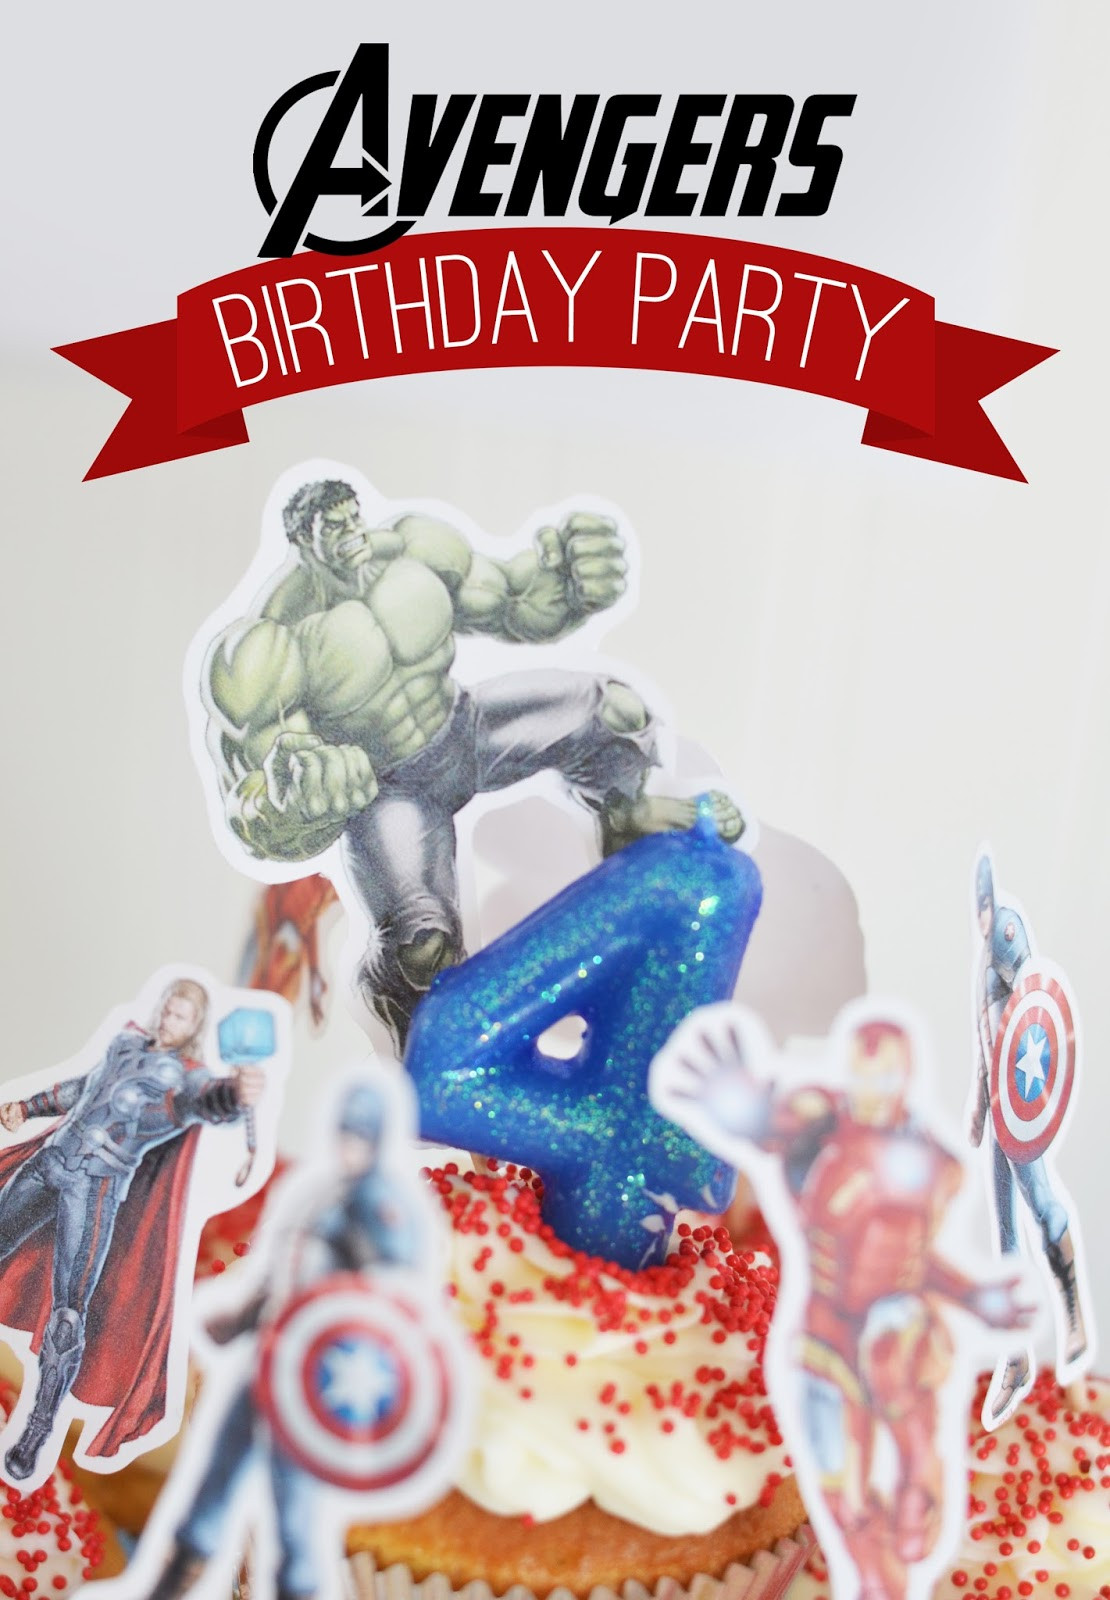 Avengers Birthday Party
 eating my life AVENGERS BIRTHDAY PARTY